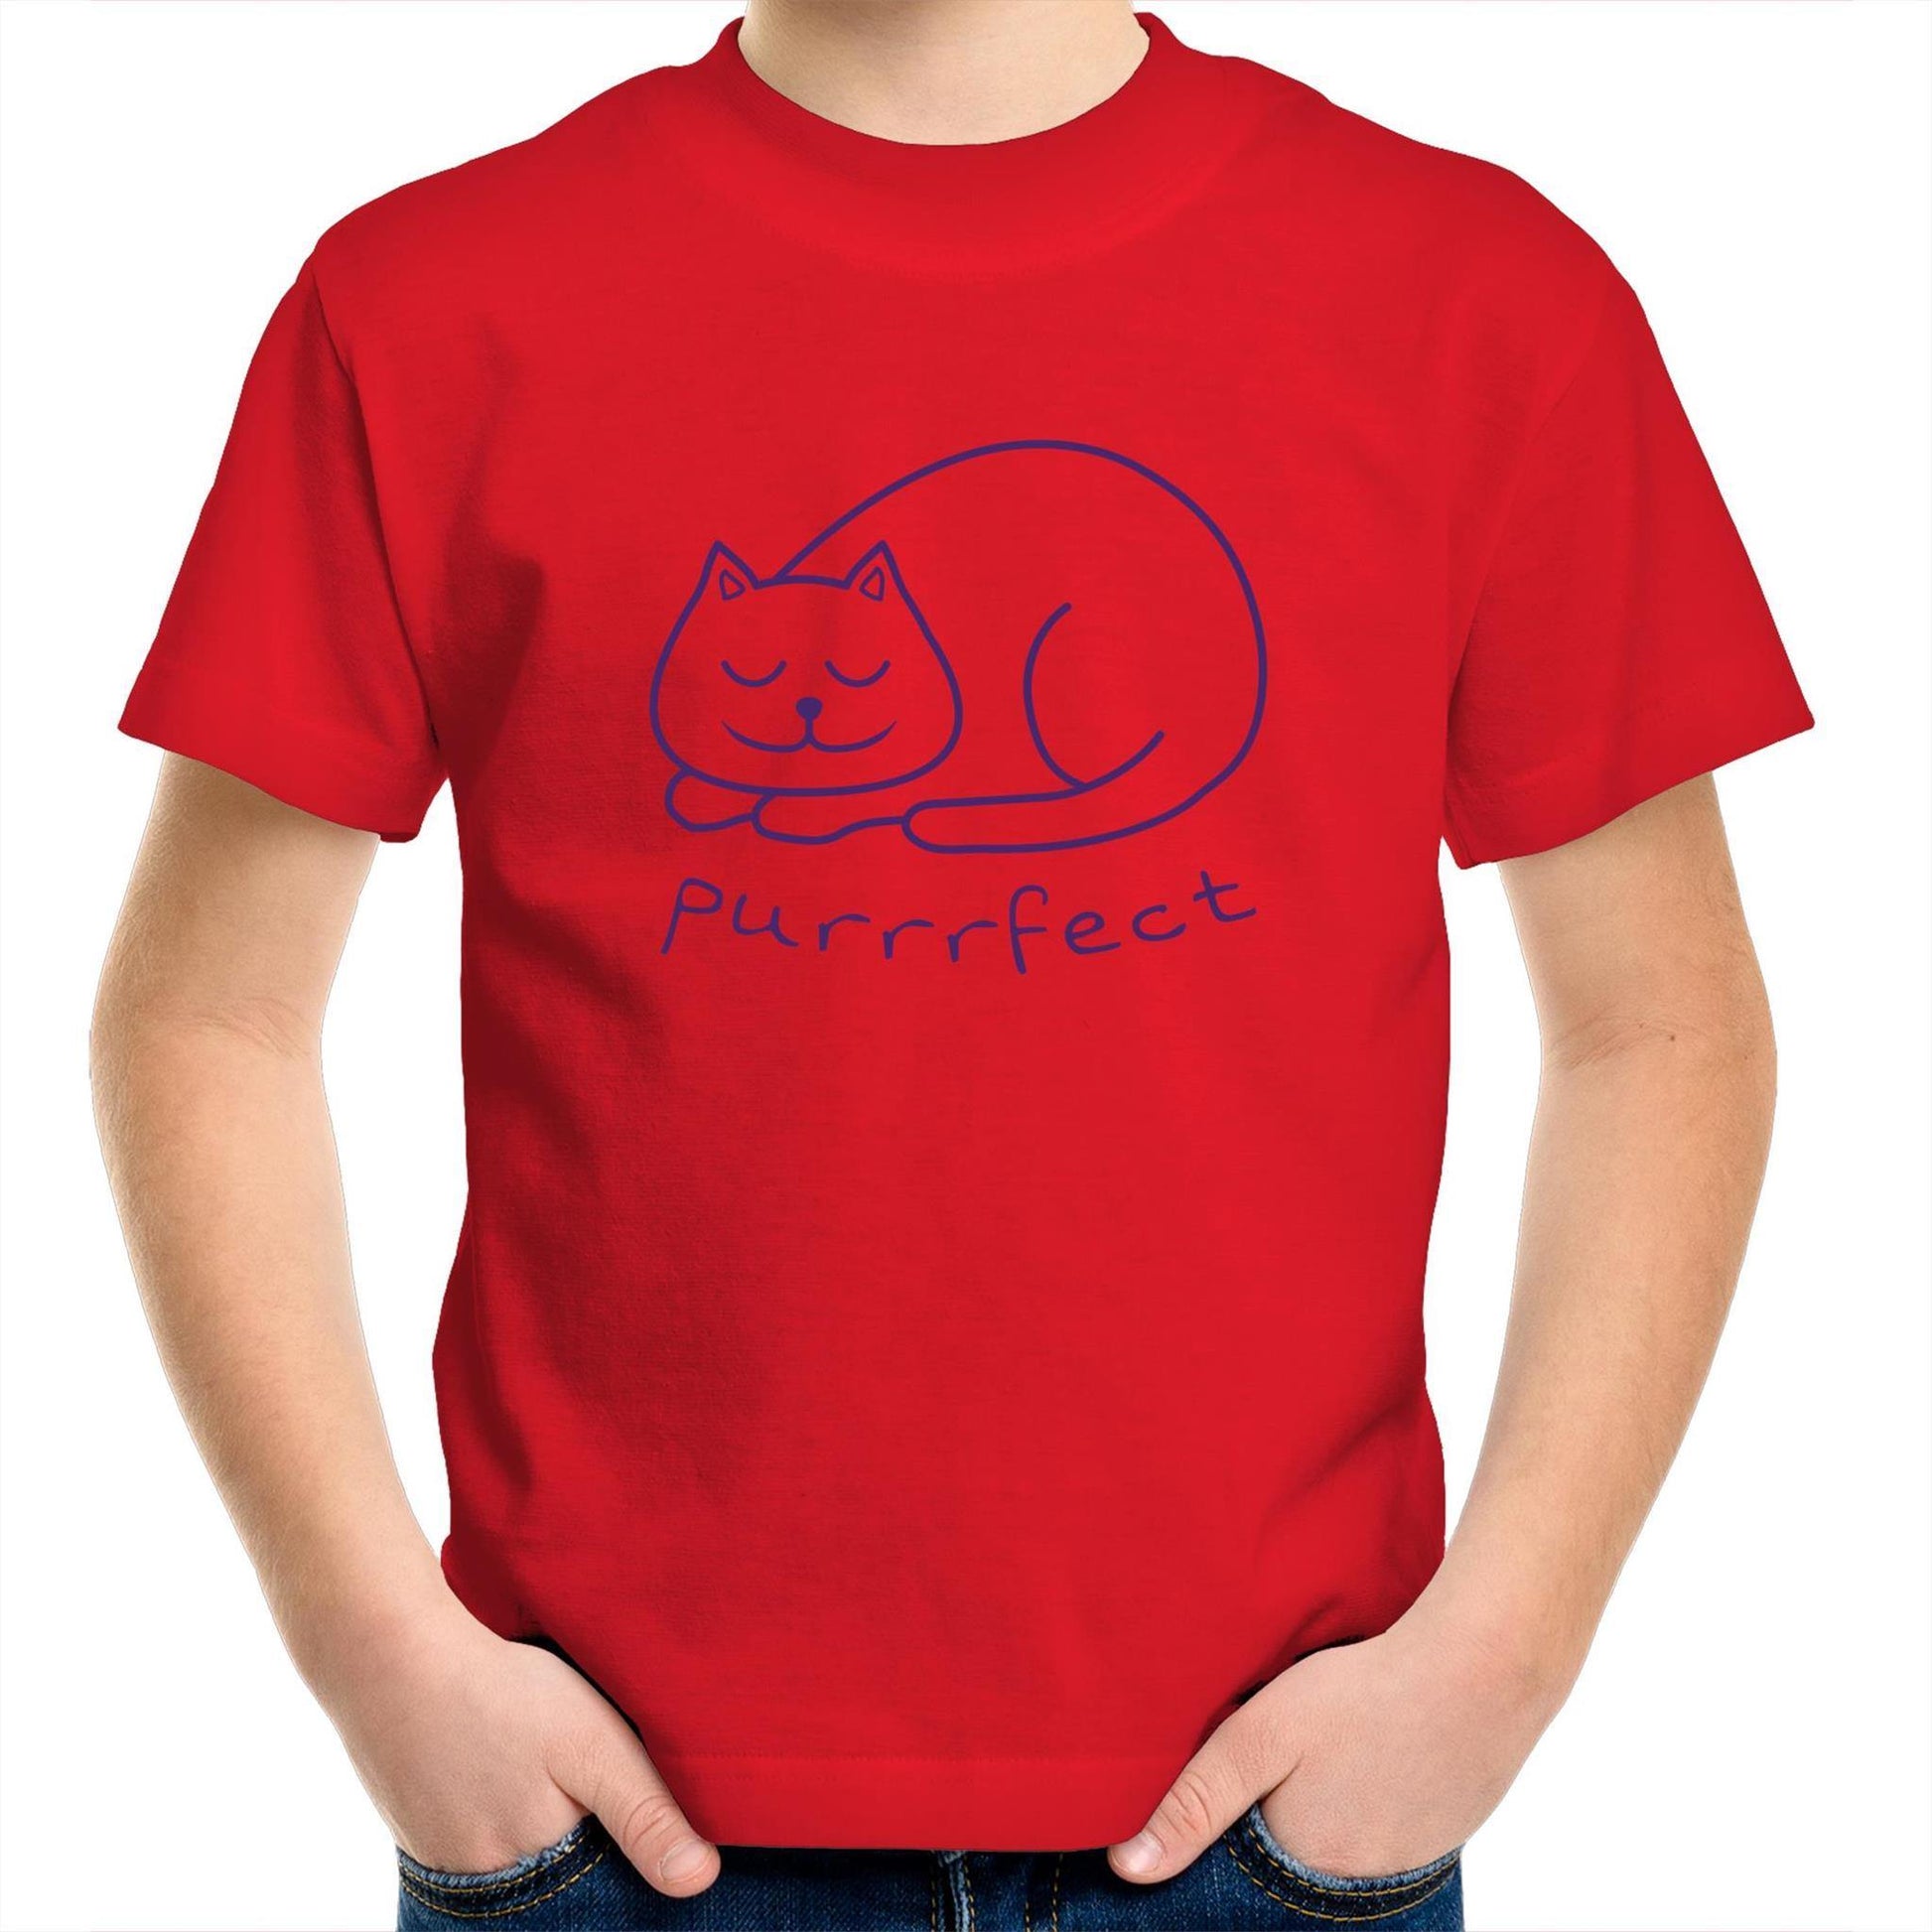 Purrrfect - Kids Youth Crew T-Shirt Red Kids Youth T-shirt animal